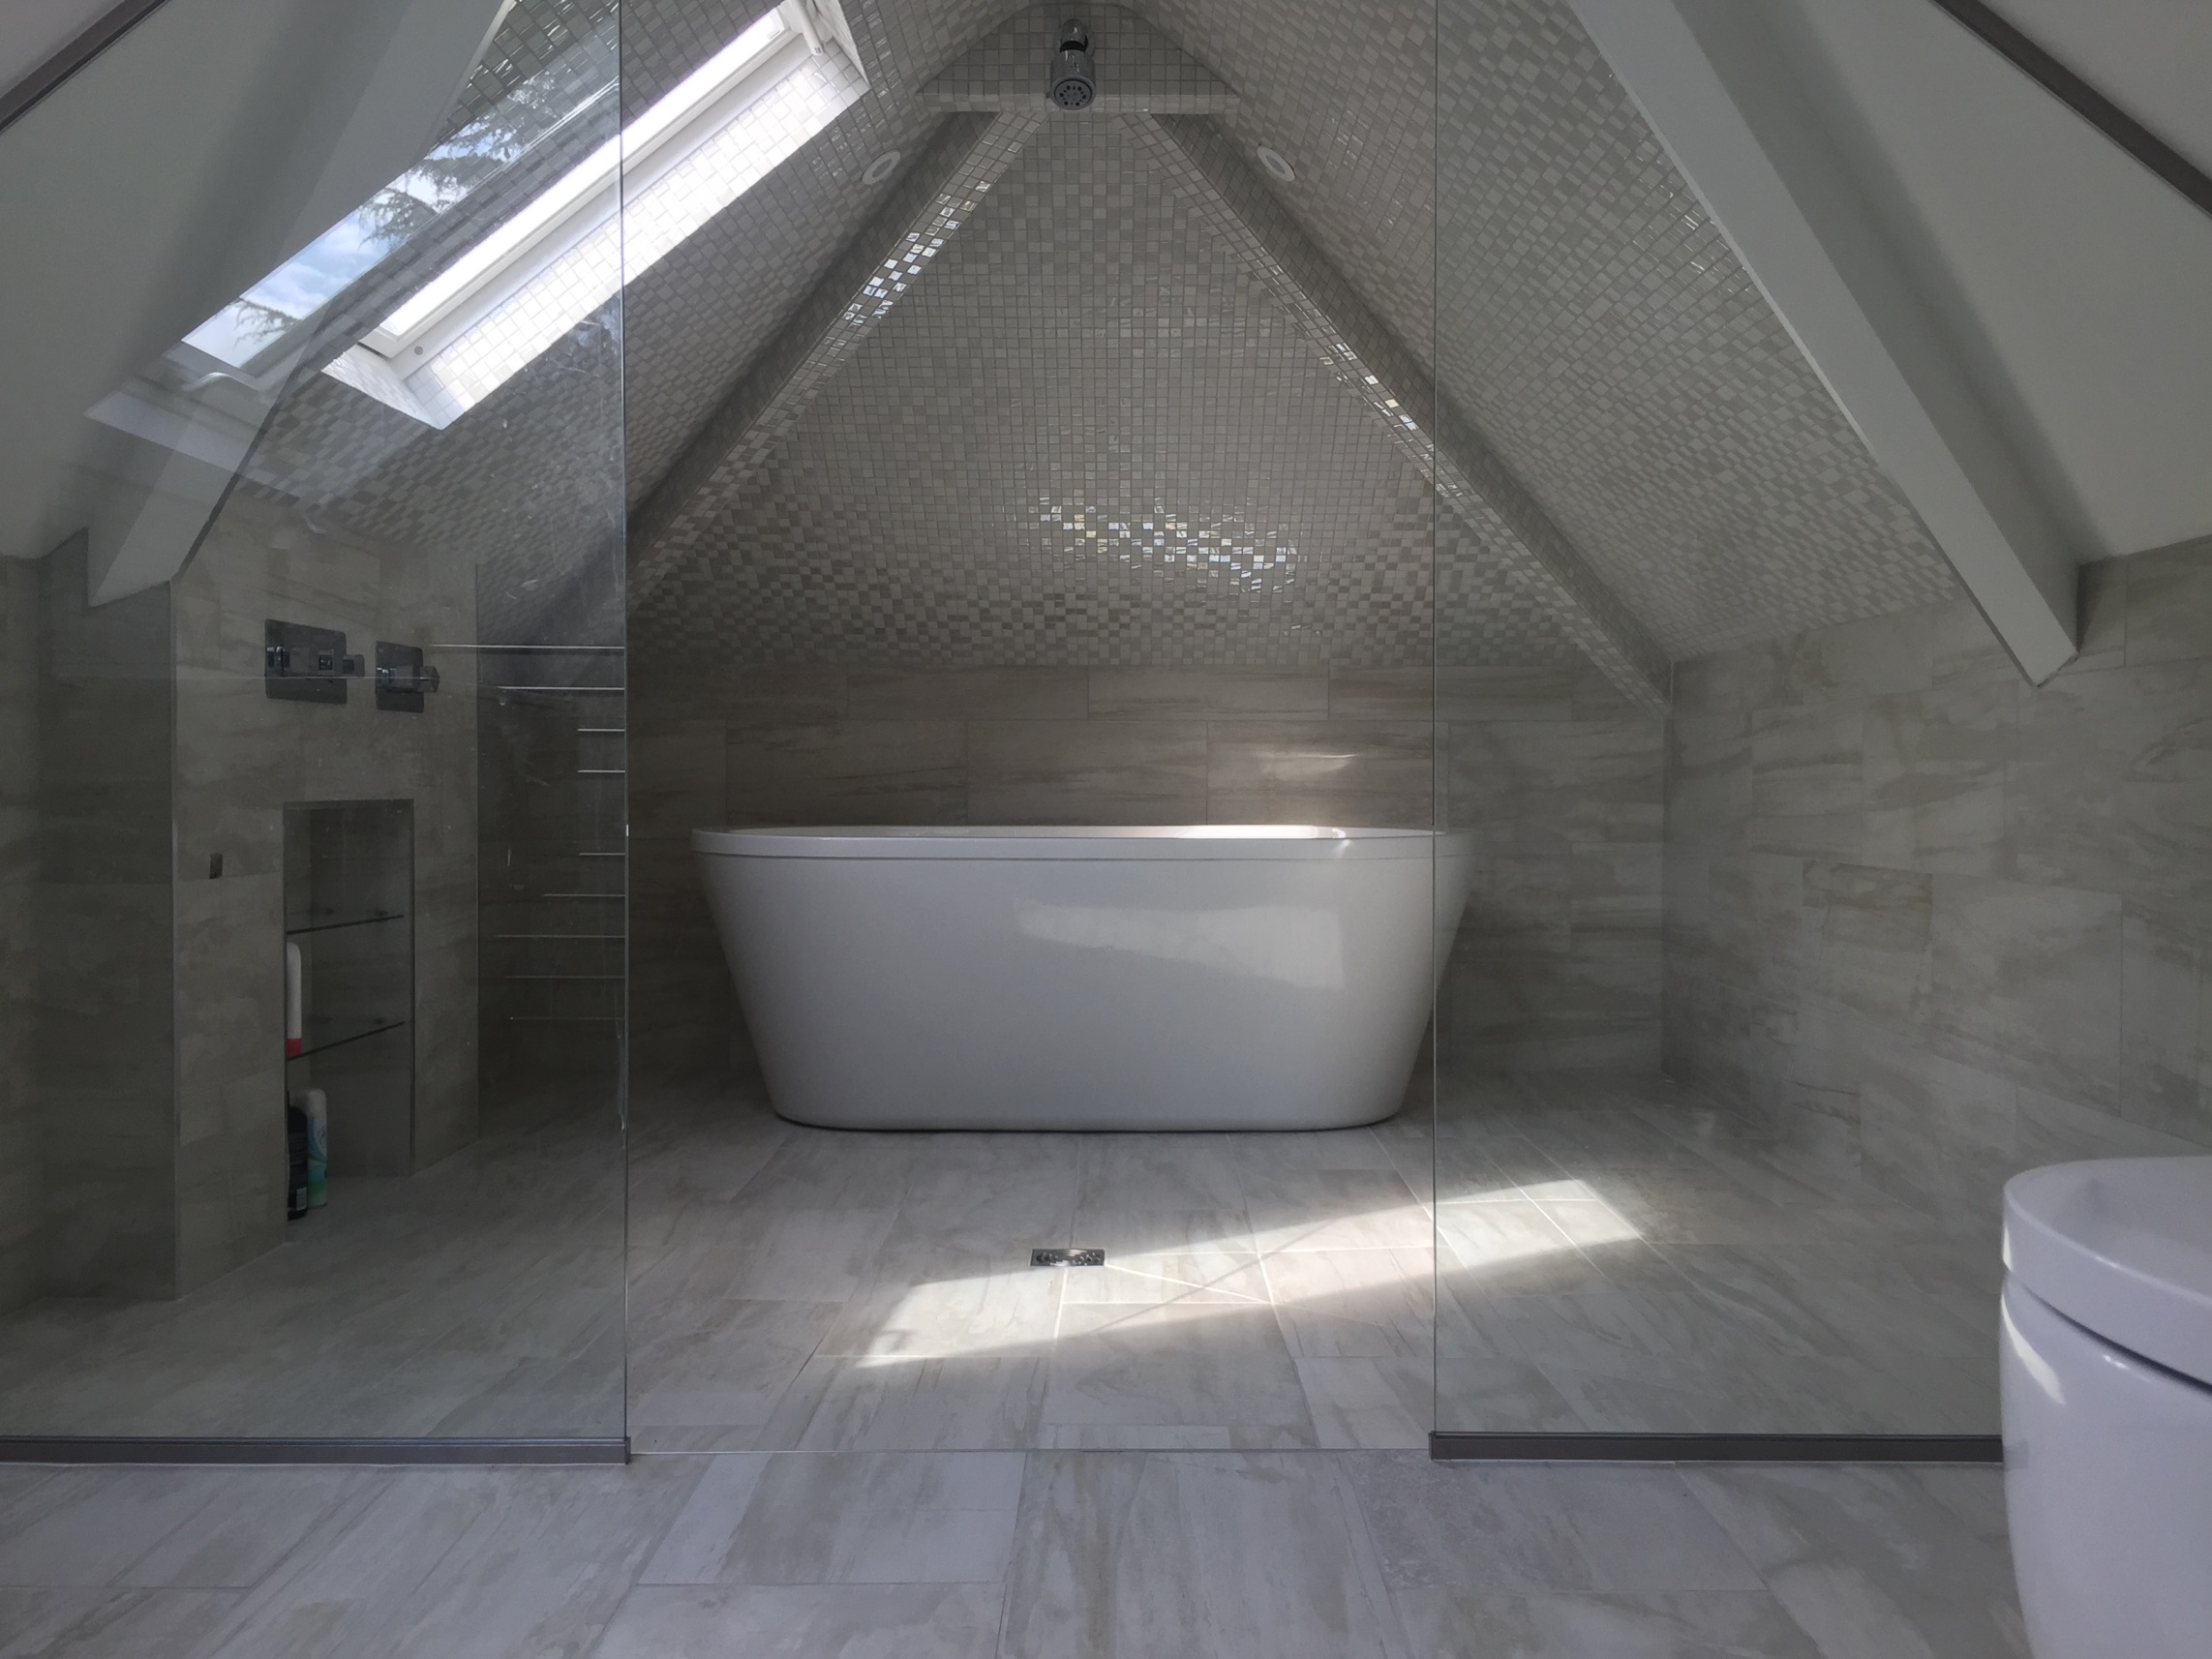 Hale Guest Ensuite Stunning Mosiac Tiled Wetroom in Attic room